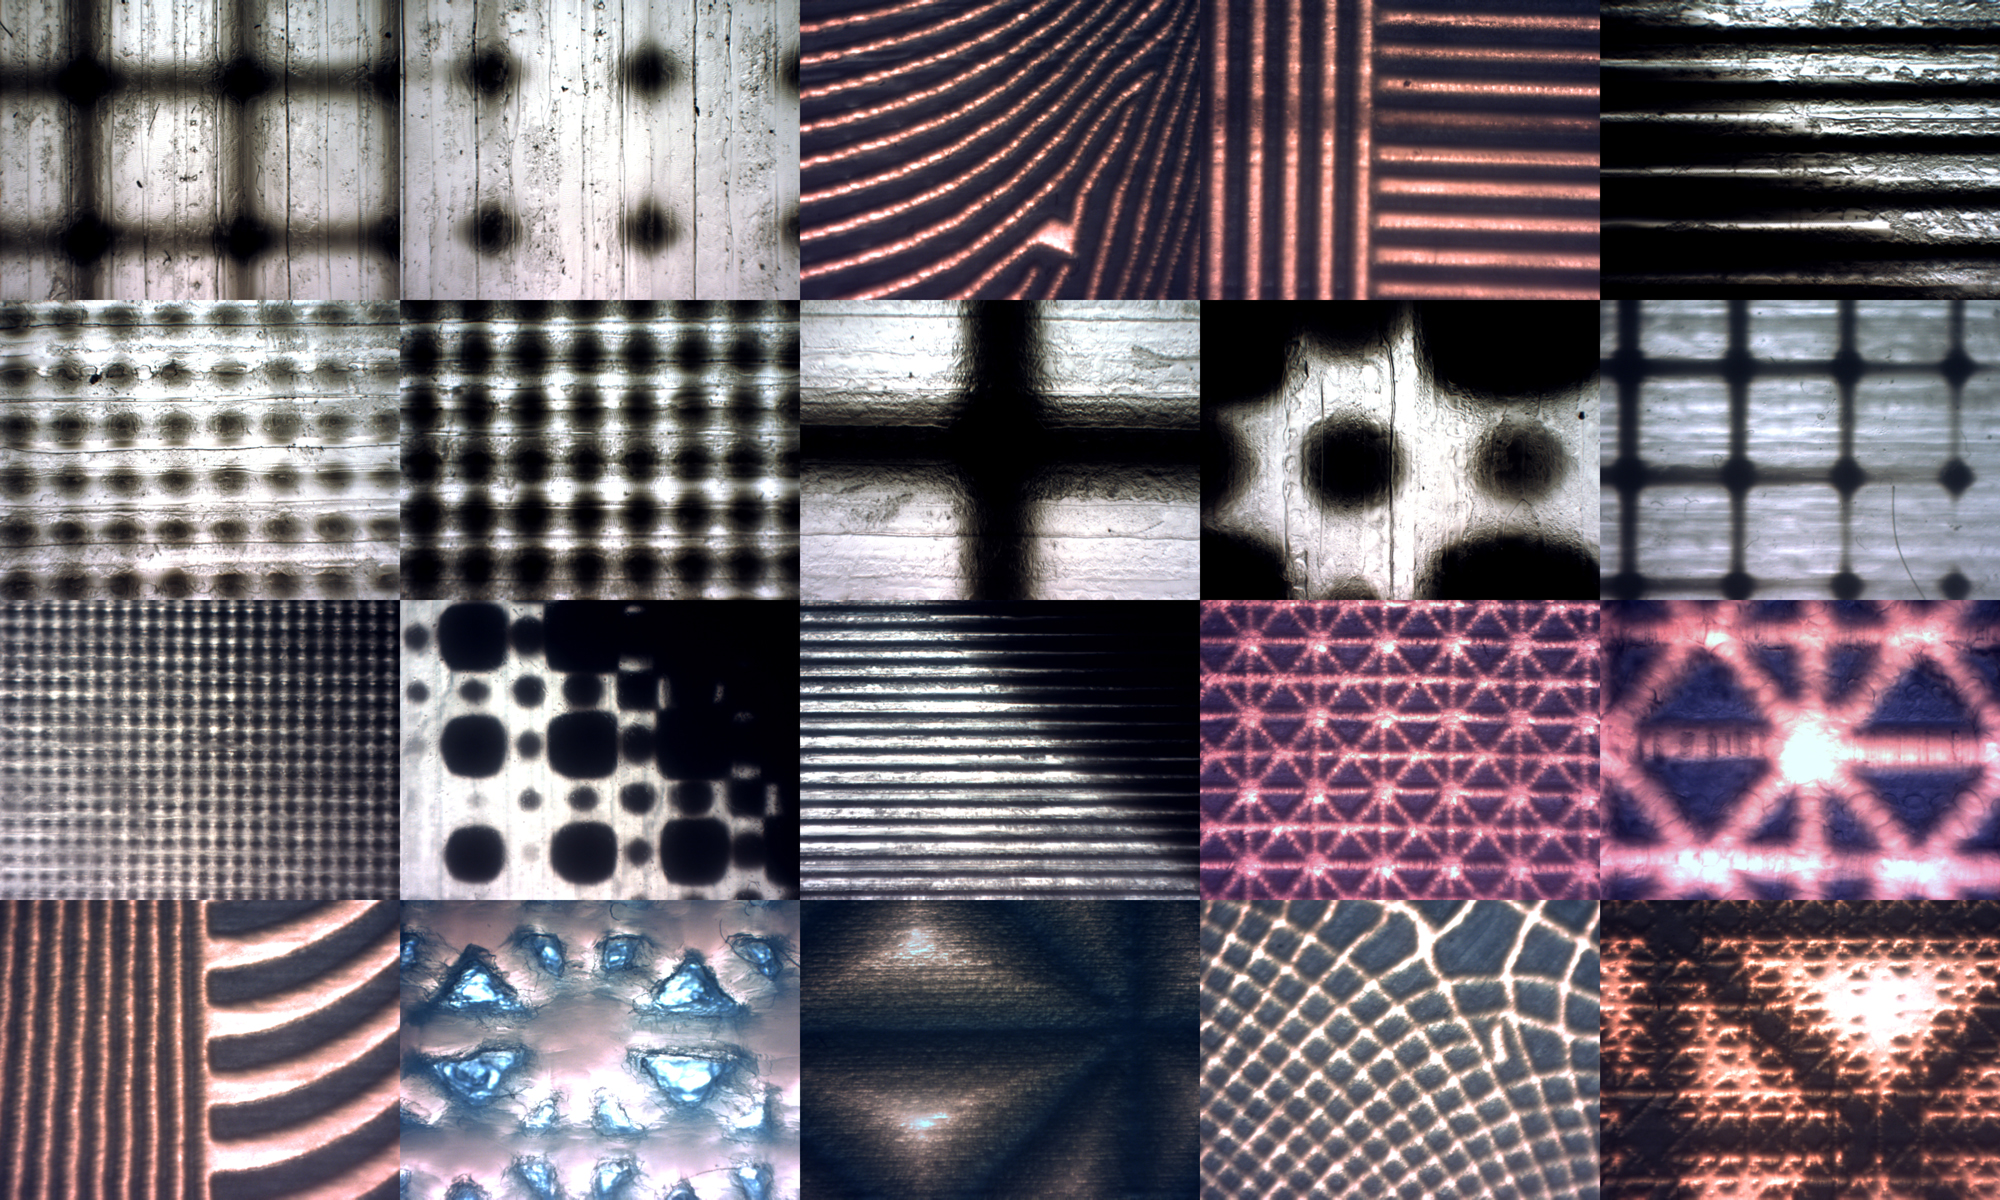  Composite of printed half-tone patterns taken at various magnification levels. 